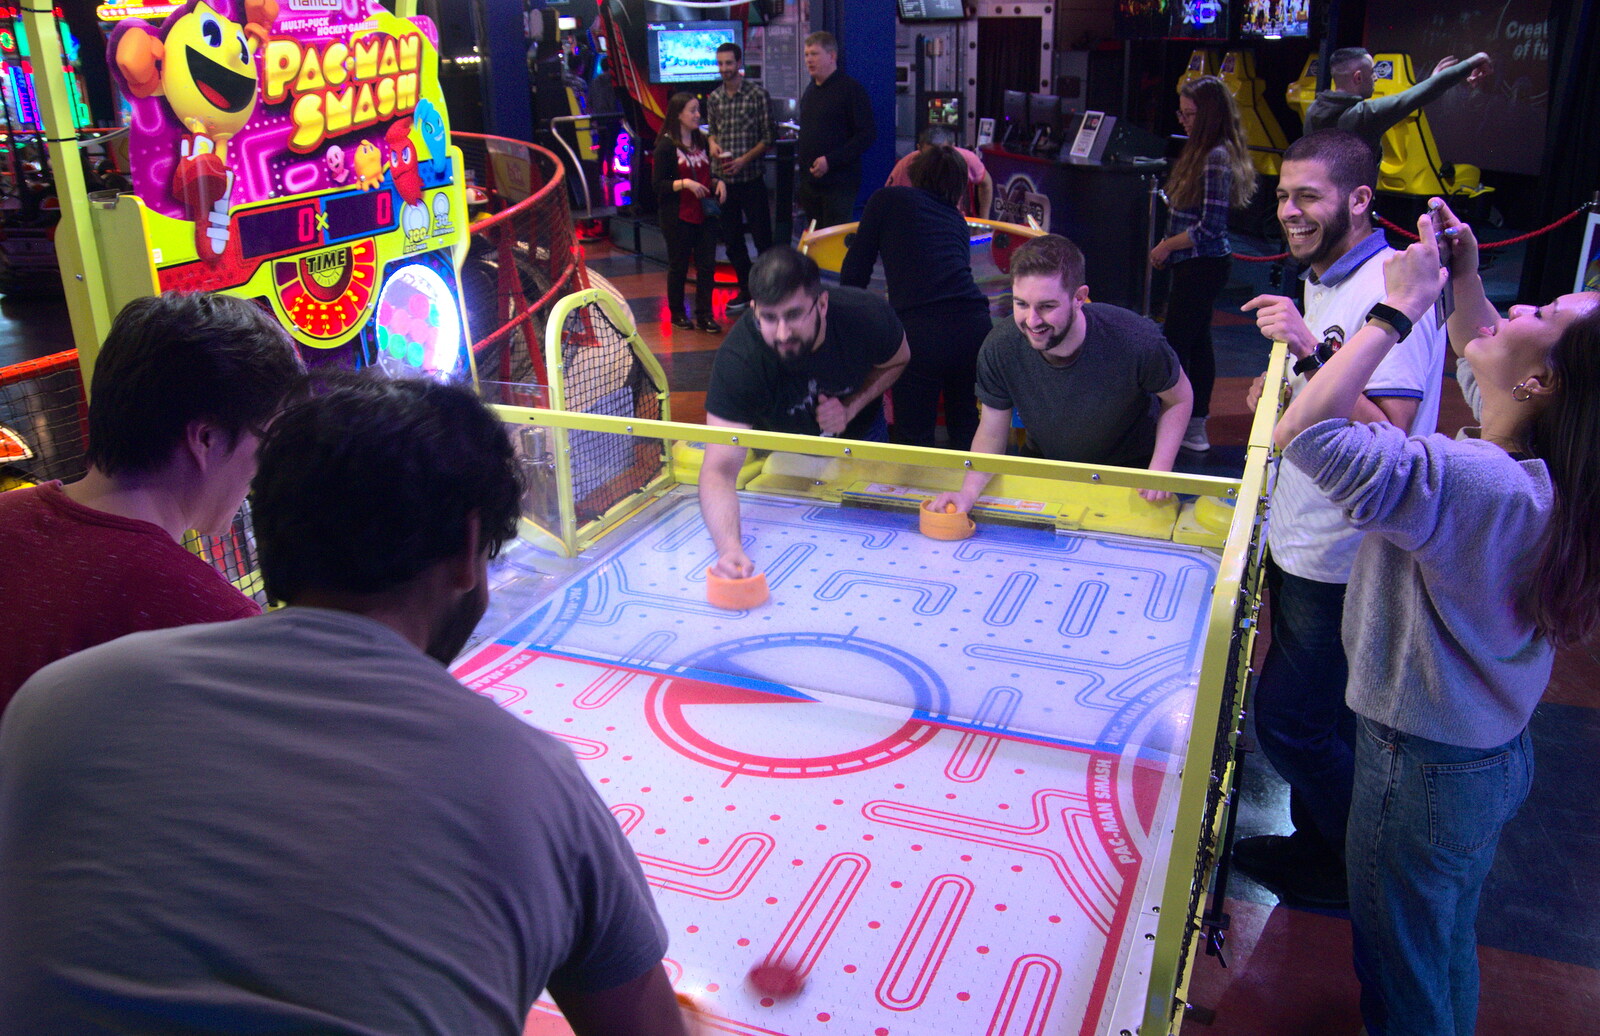 More air hockey from A Team Outing at Namco Funscape, South Bank, London - 27th March 2019